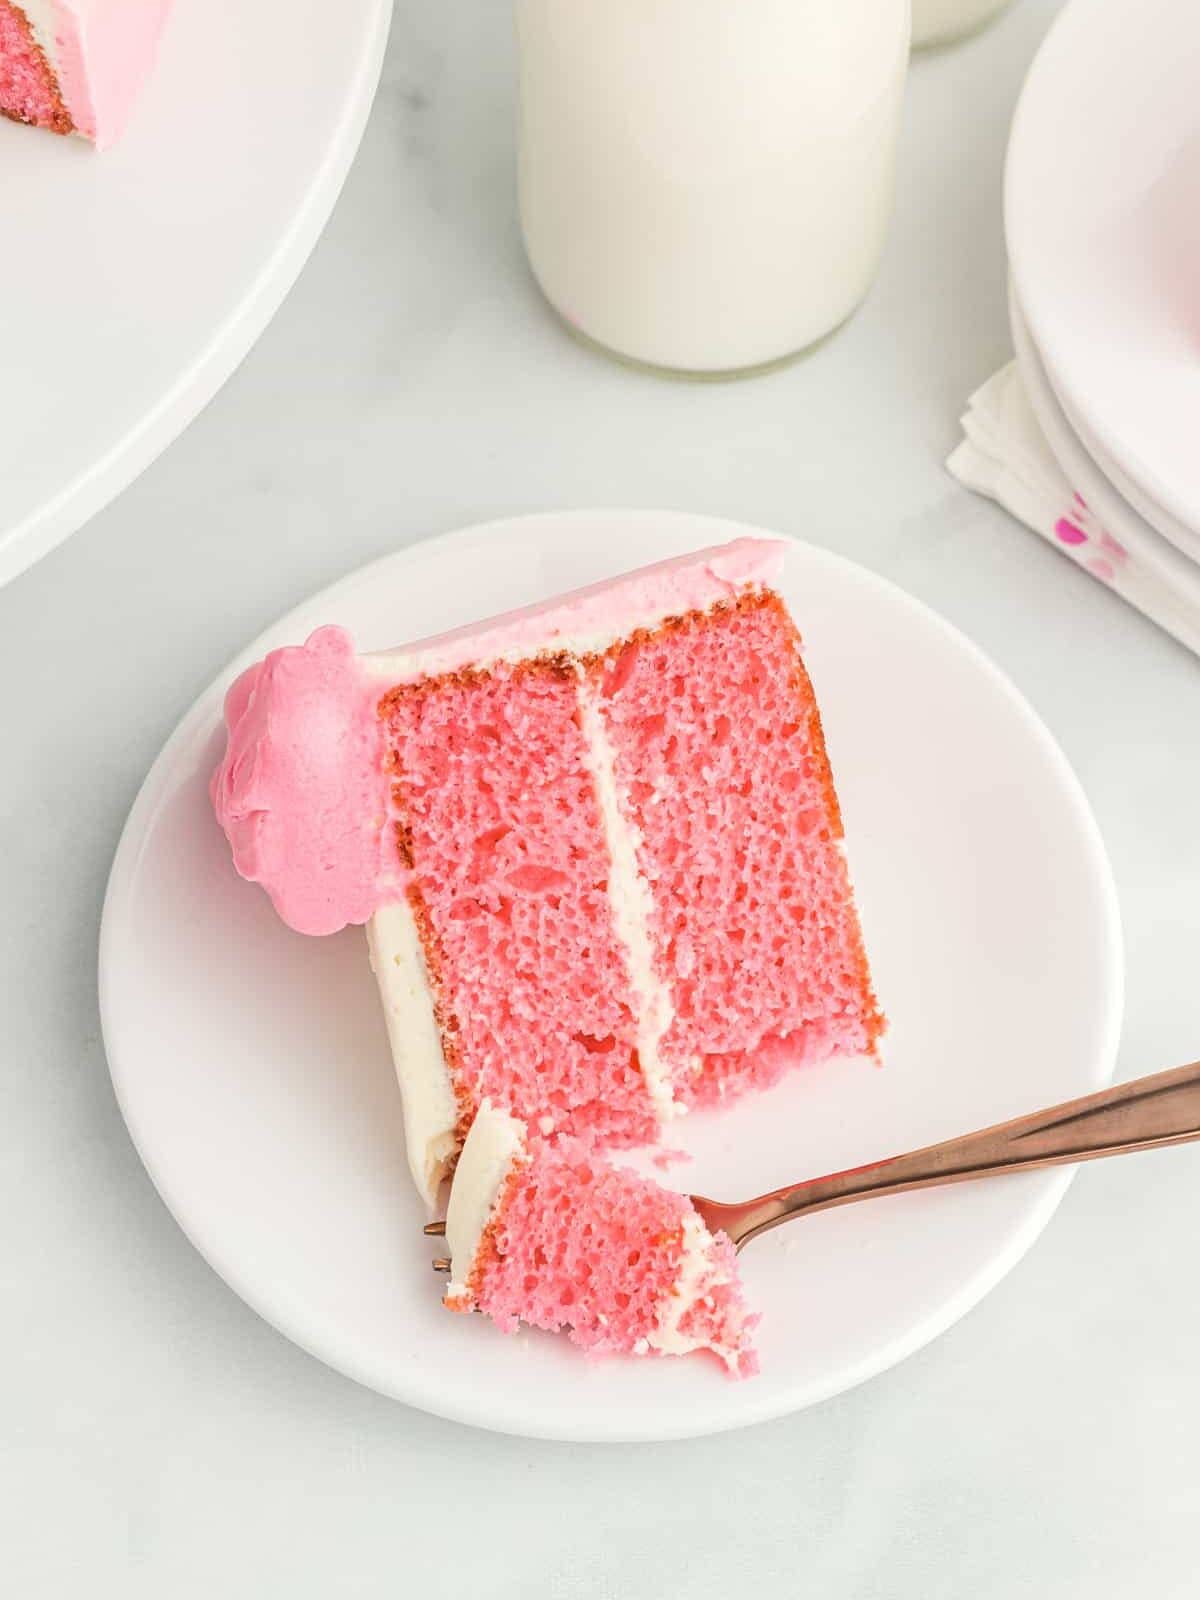 overhead view of a slice of pink velvet cake on its side on a white plate with a fork.